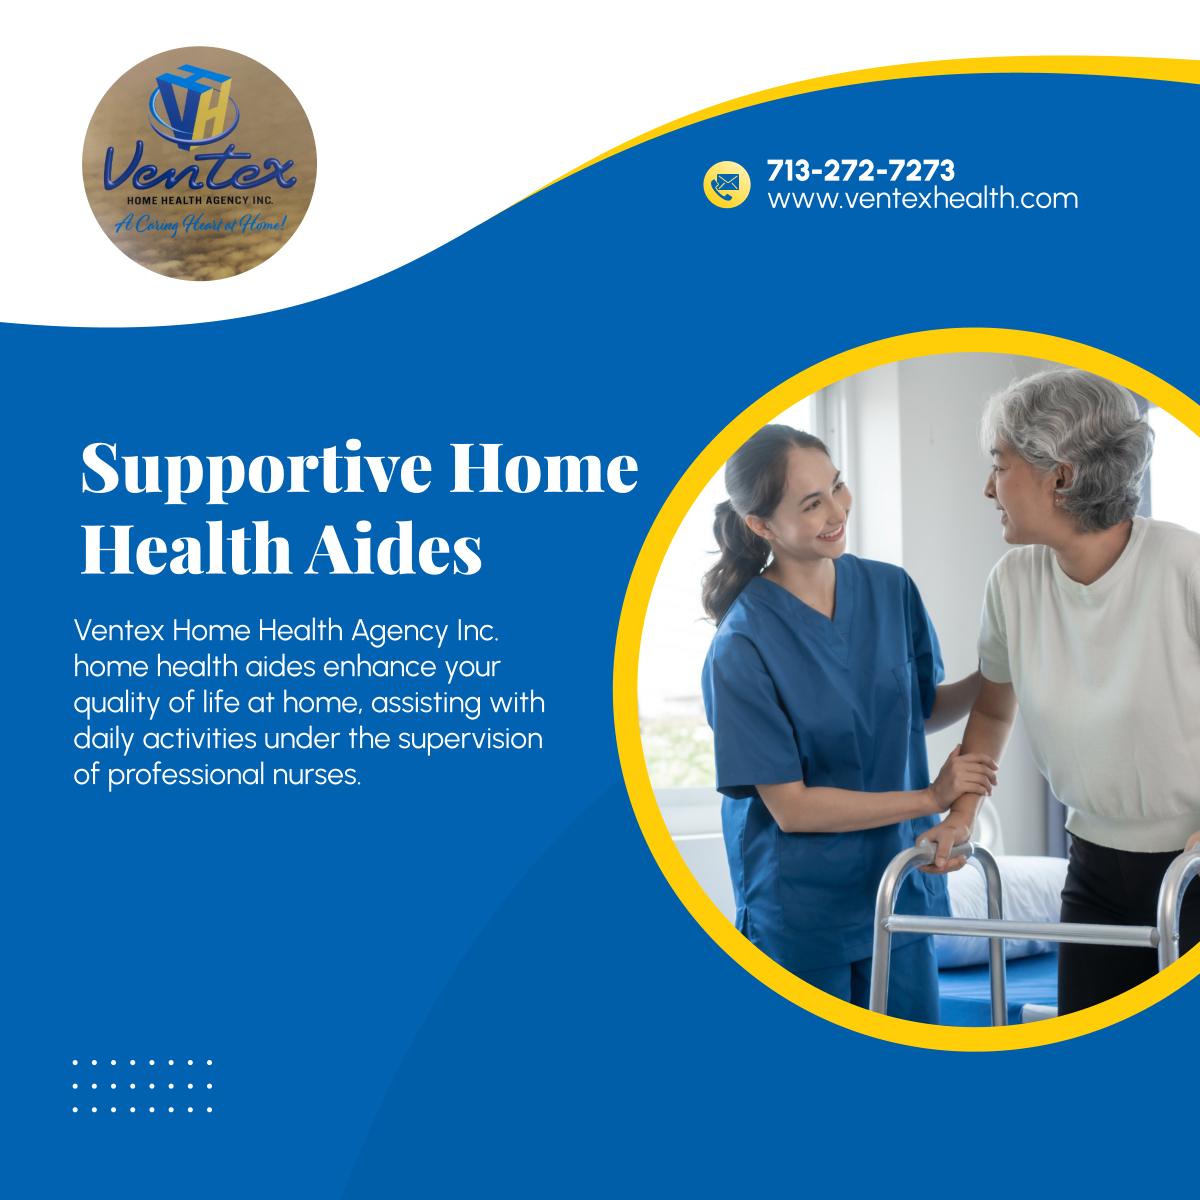 Elevate your daily living at home with our supportive and trained health aides. Safety and care go hand in hand. 

#HoustonTX #HomeHealthCare #HomeSupport